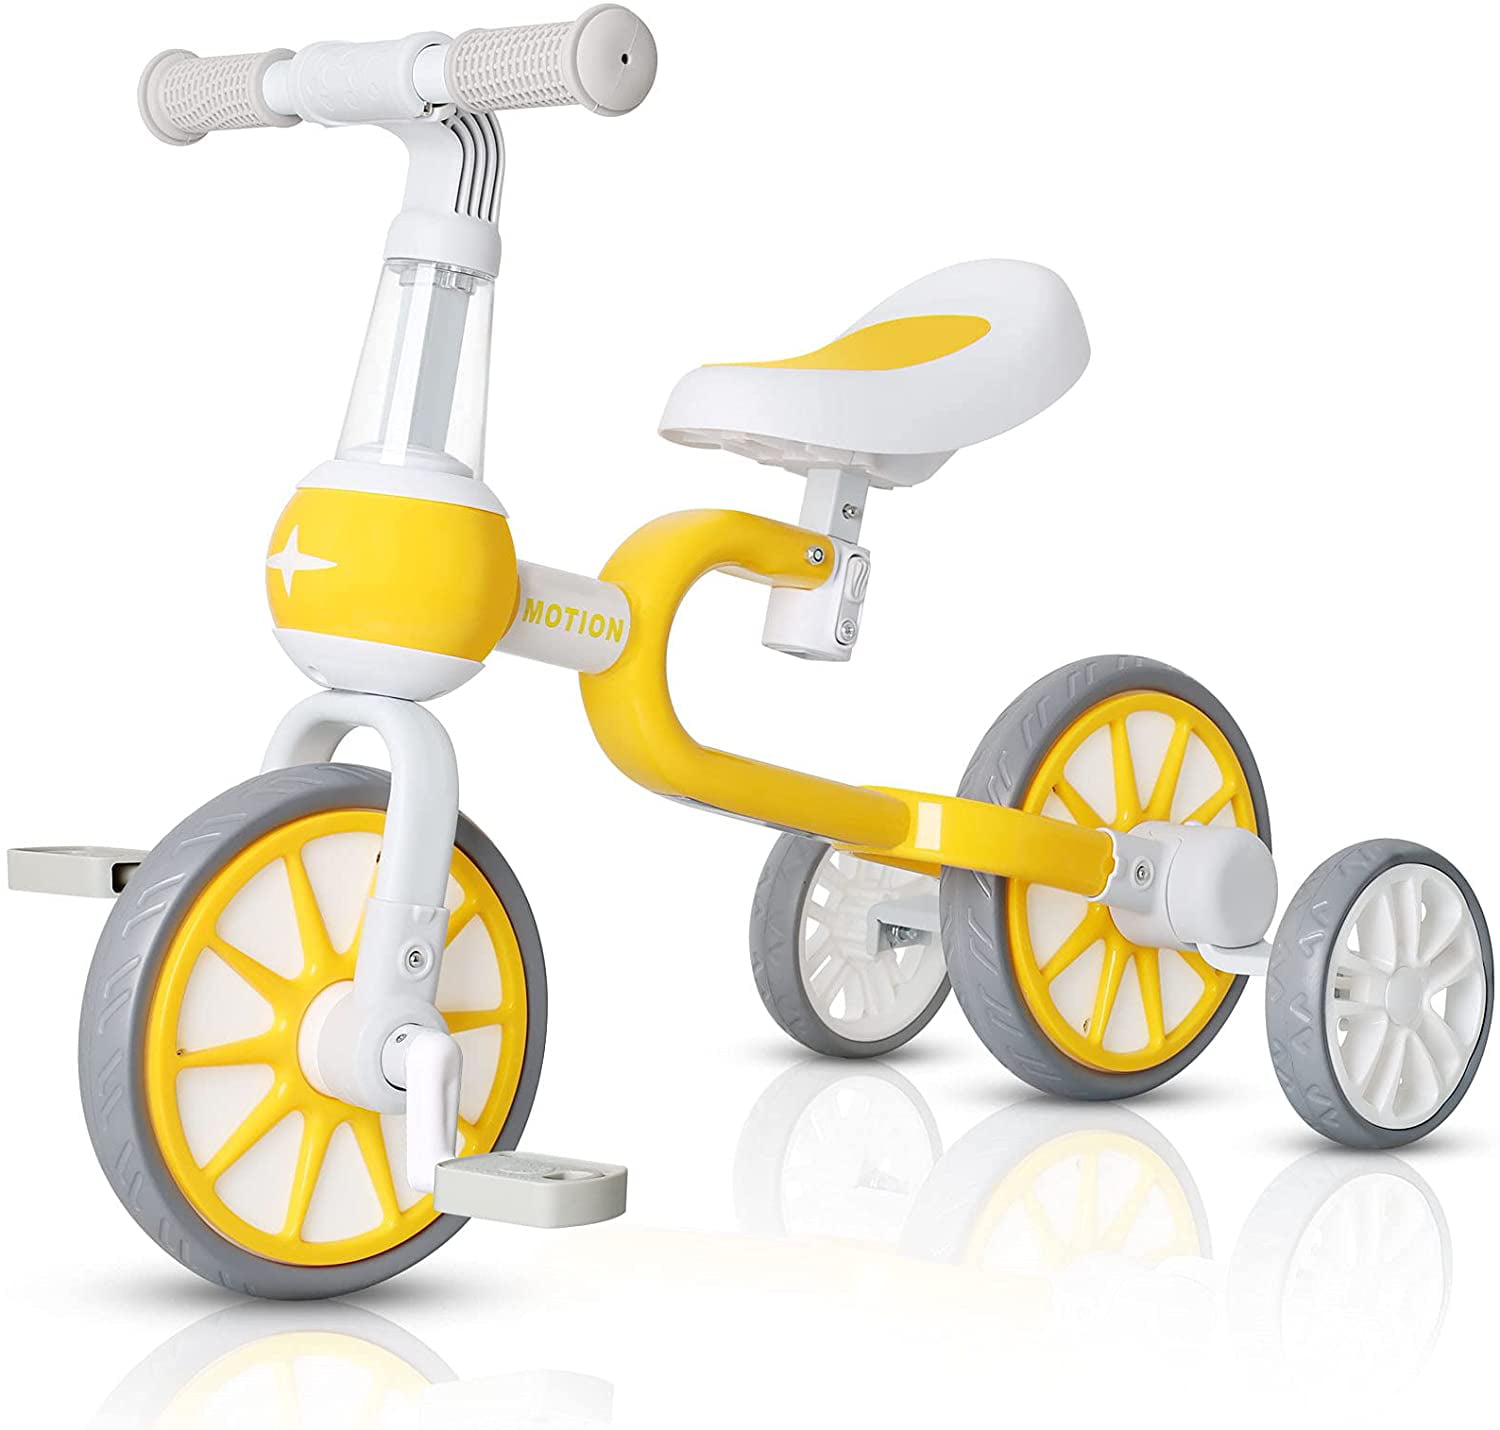 3 in 1 Kids Child Trike Tricycle Toddler Balance Bike Adjustable Pedals Yellow 